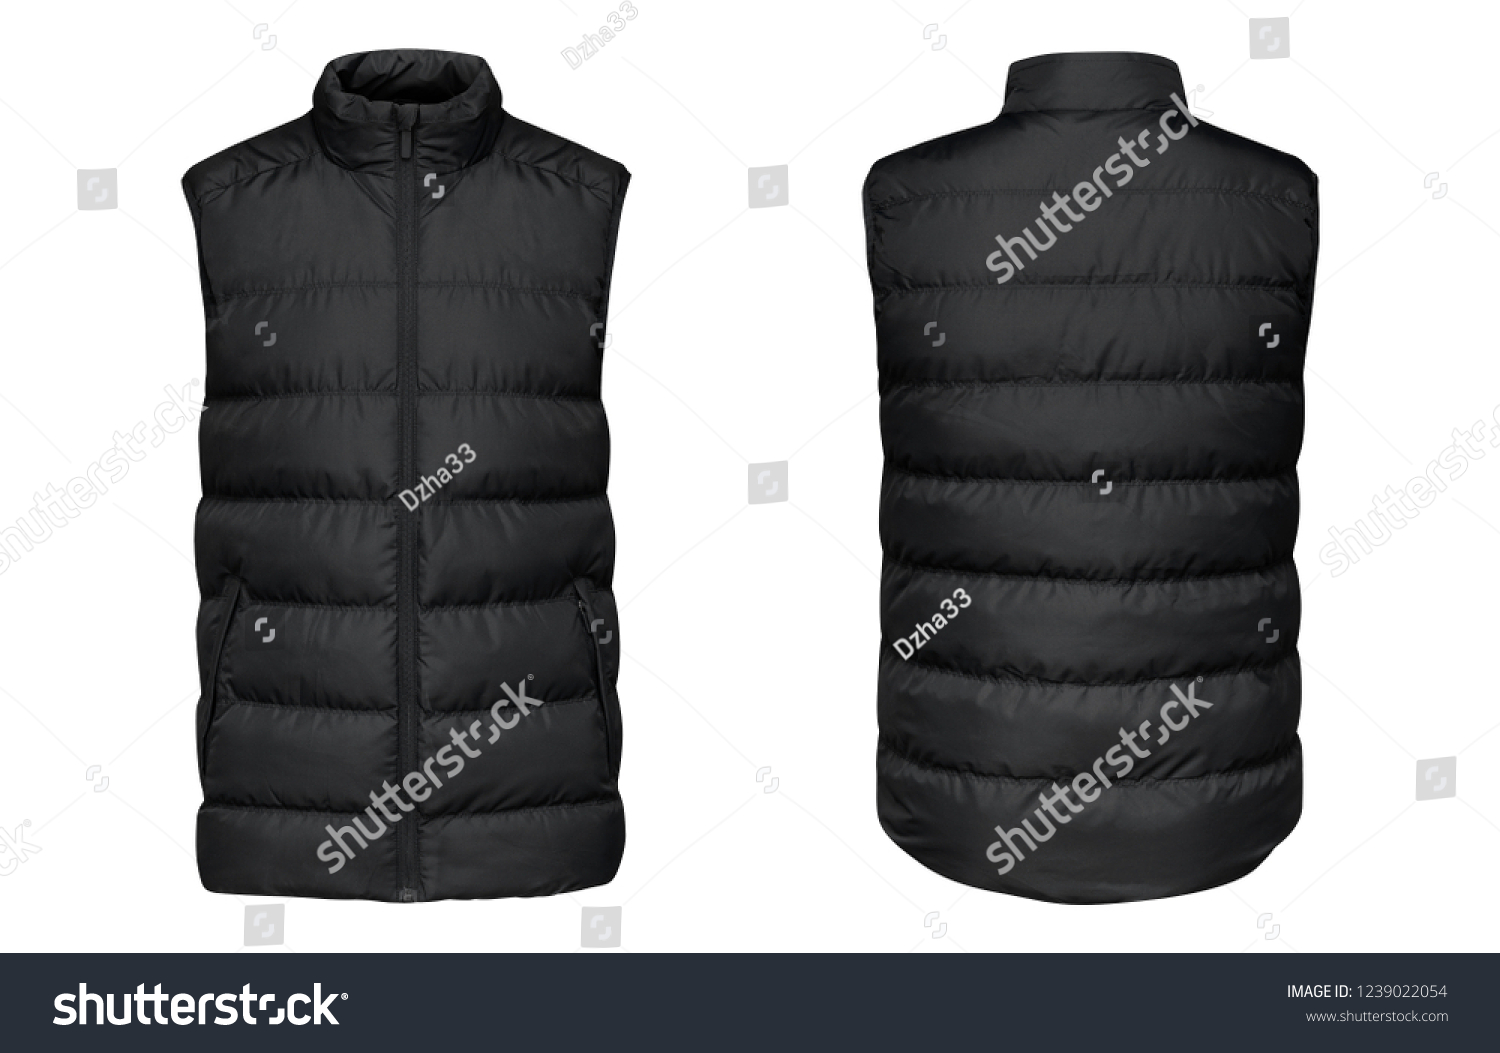 1,123 Vest mockup Stock Photos, Images & Photography | Shutterstock